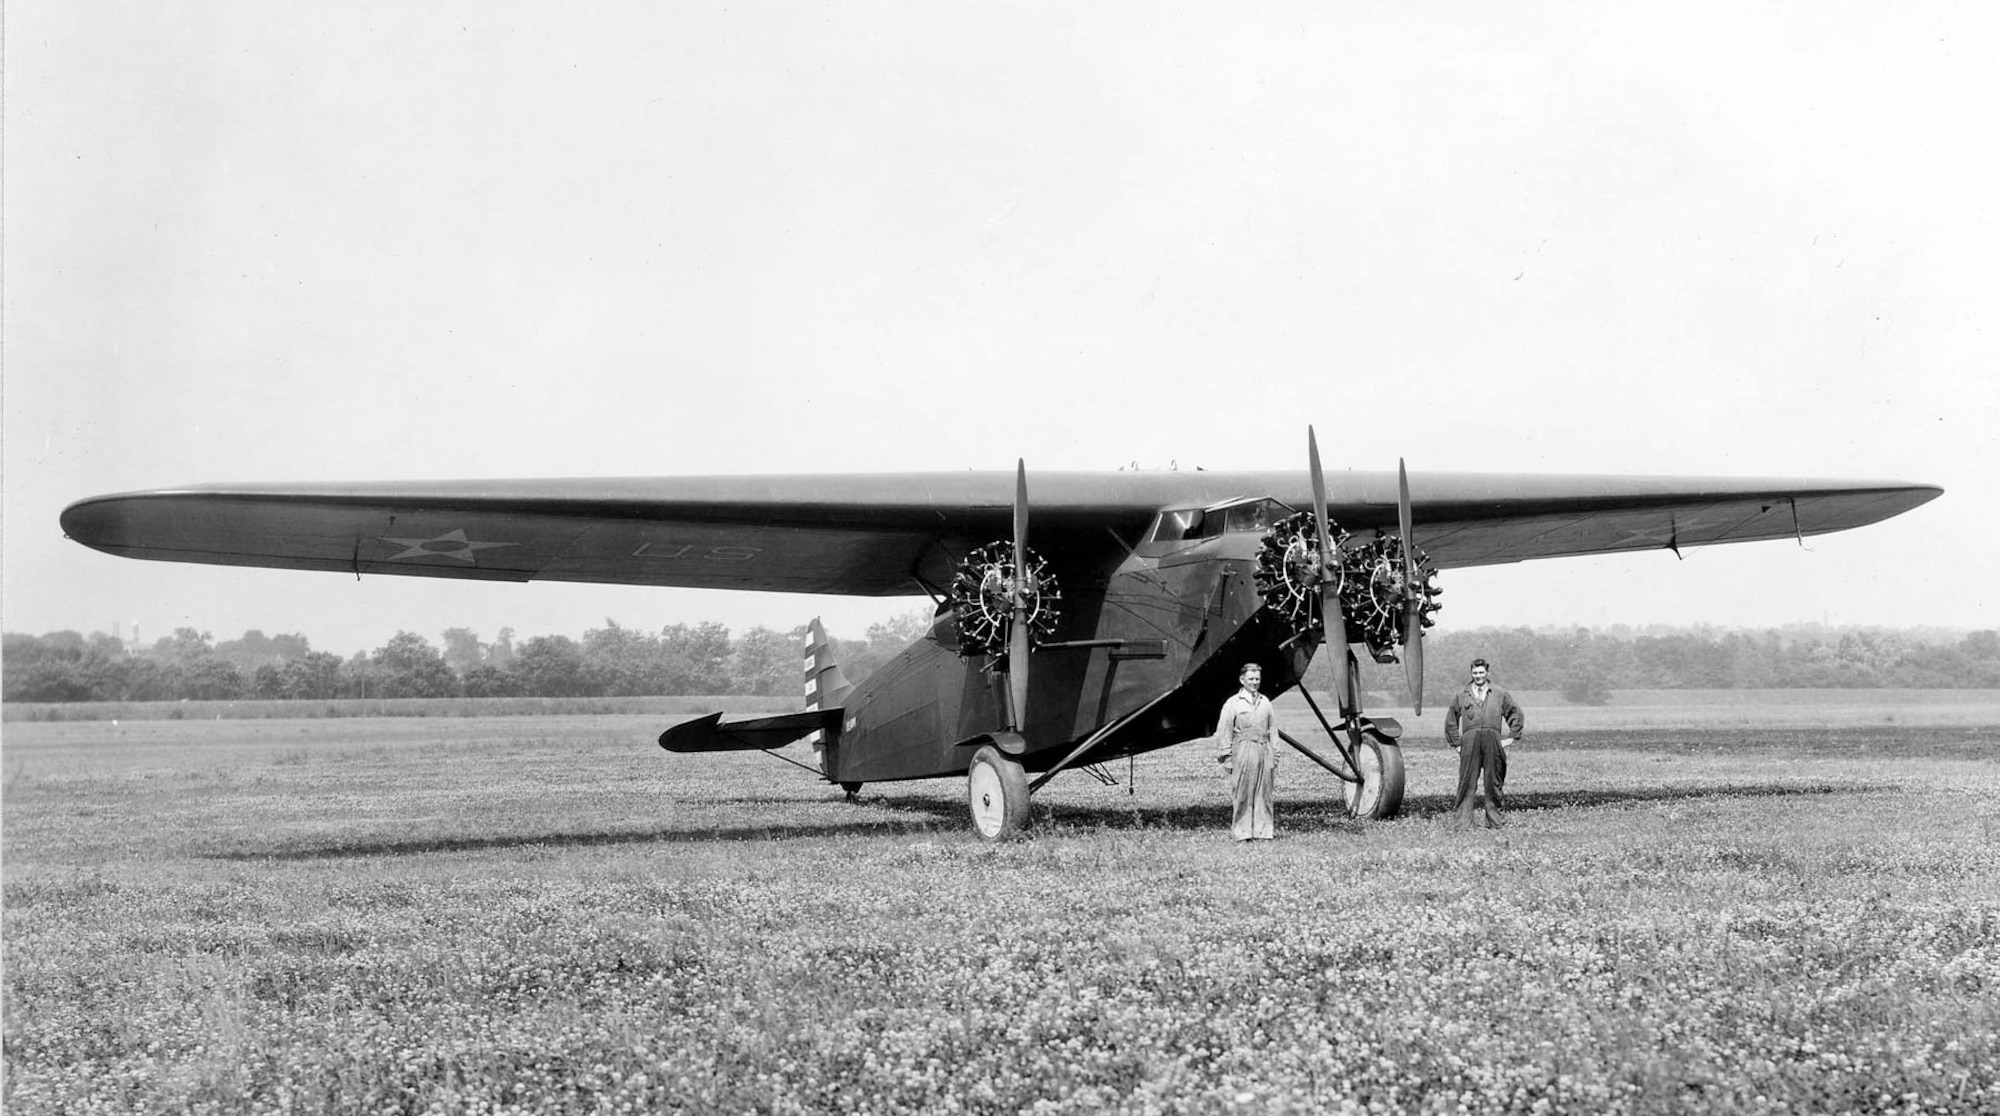 Atlantic-Fokker C-2 "Bird of Paradise" 3/4 front view. (U.S. Air Force photo)